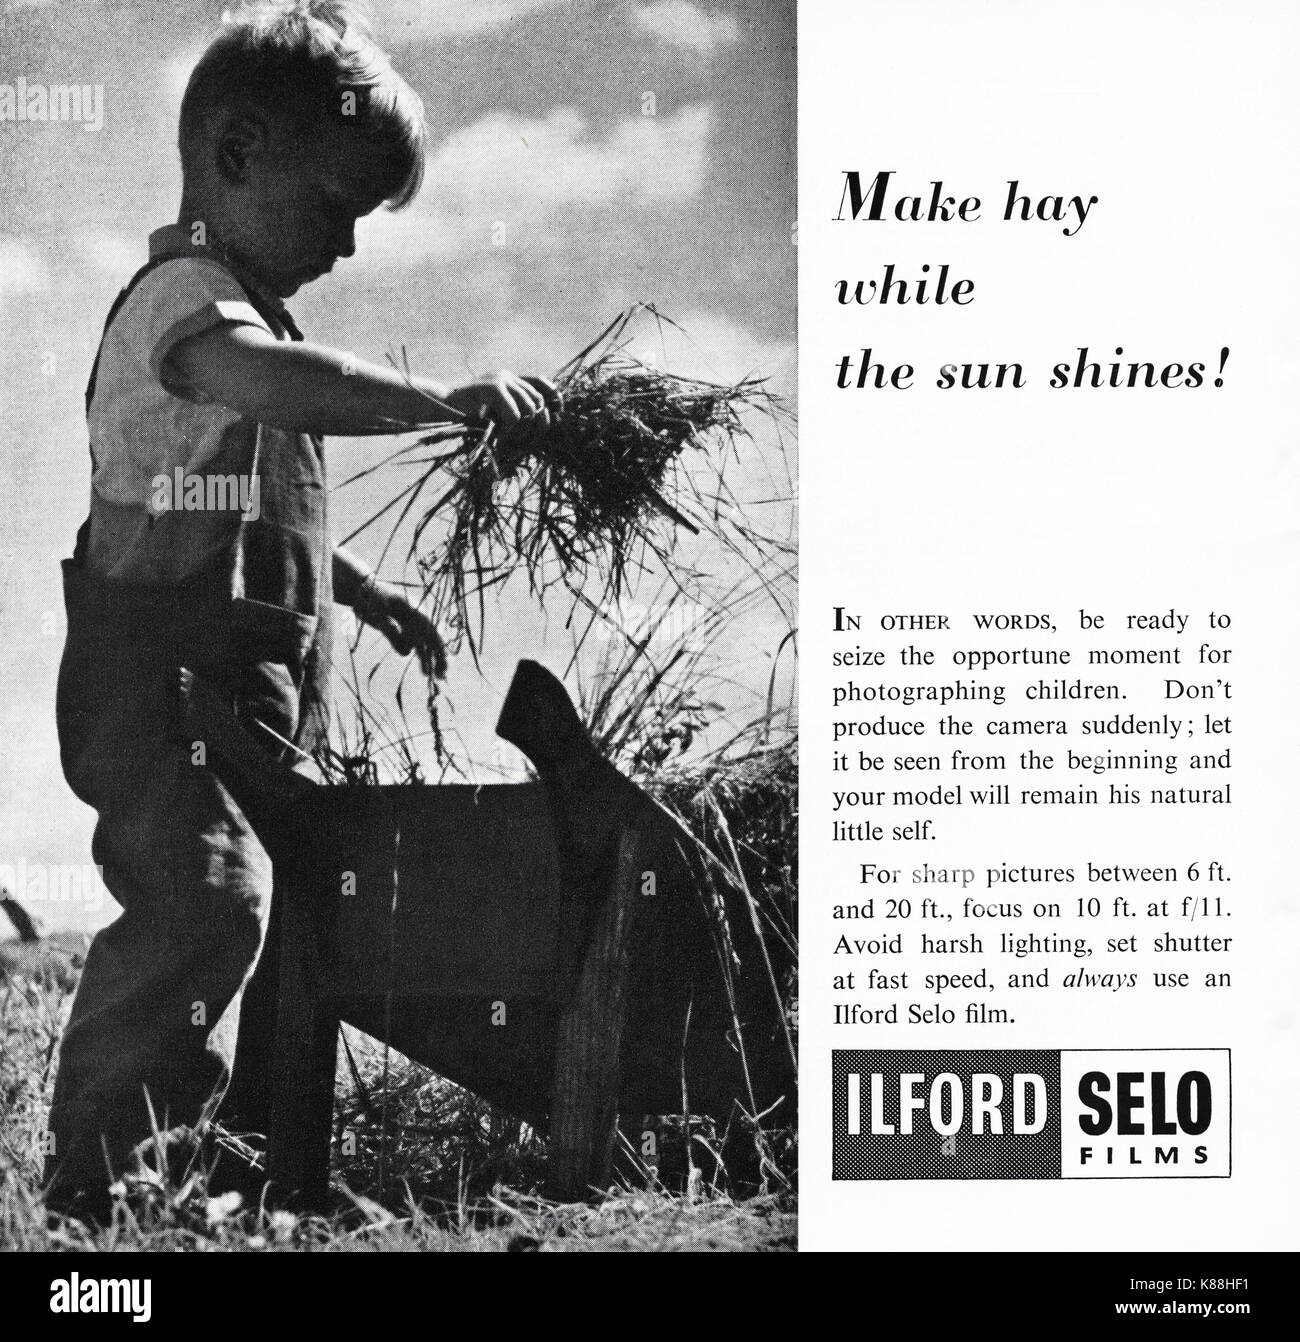 1940s old vintage original advert advertising Ilford Selo Films in magazine circa 1947 when supplies were still restricted under post-war rationing Stock Photo